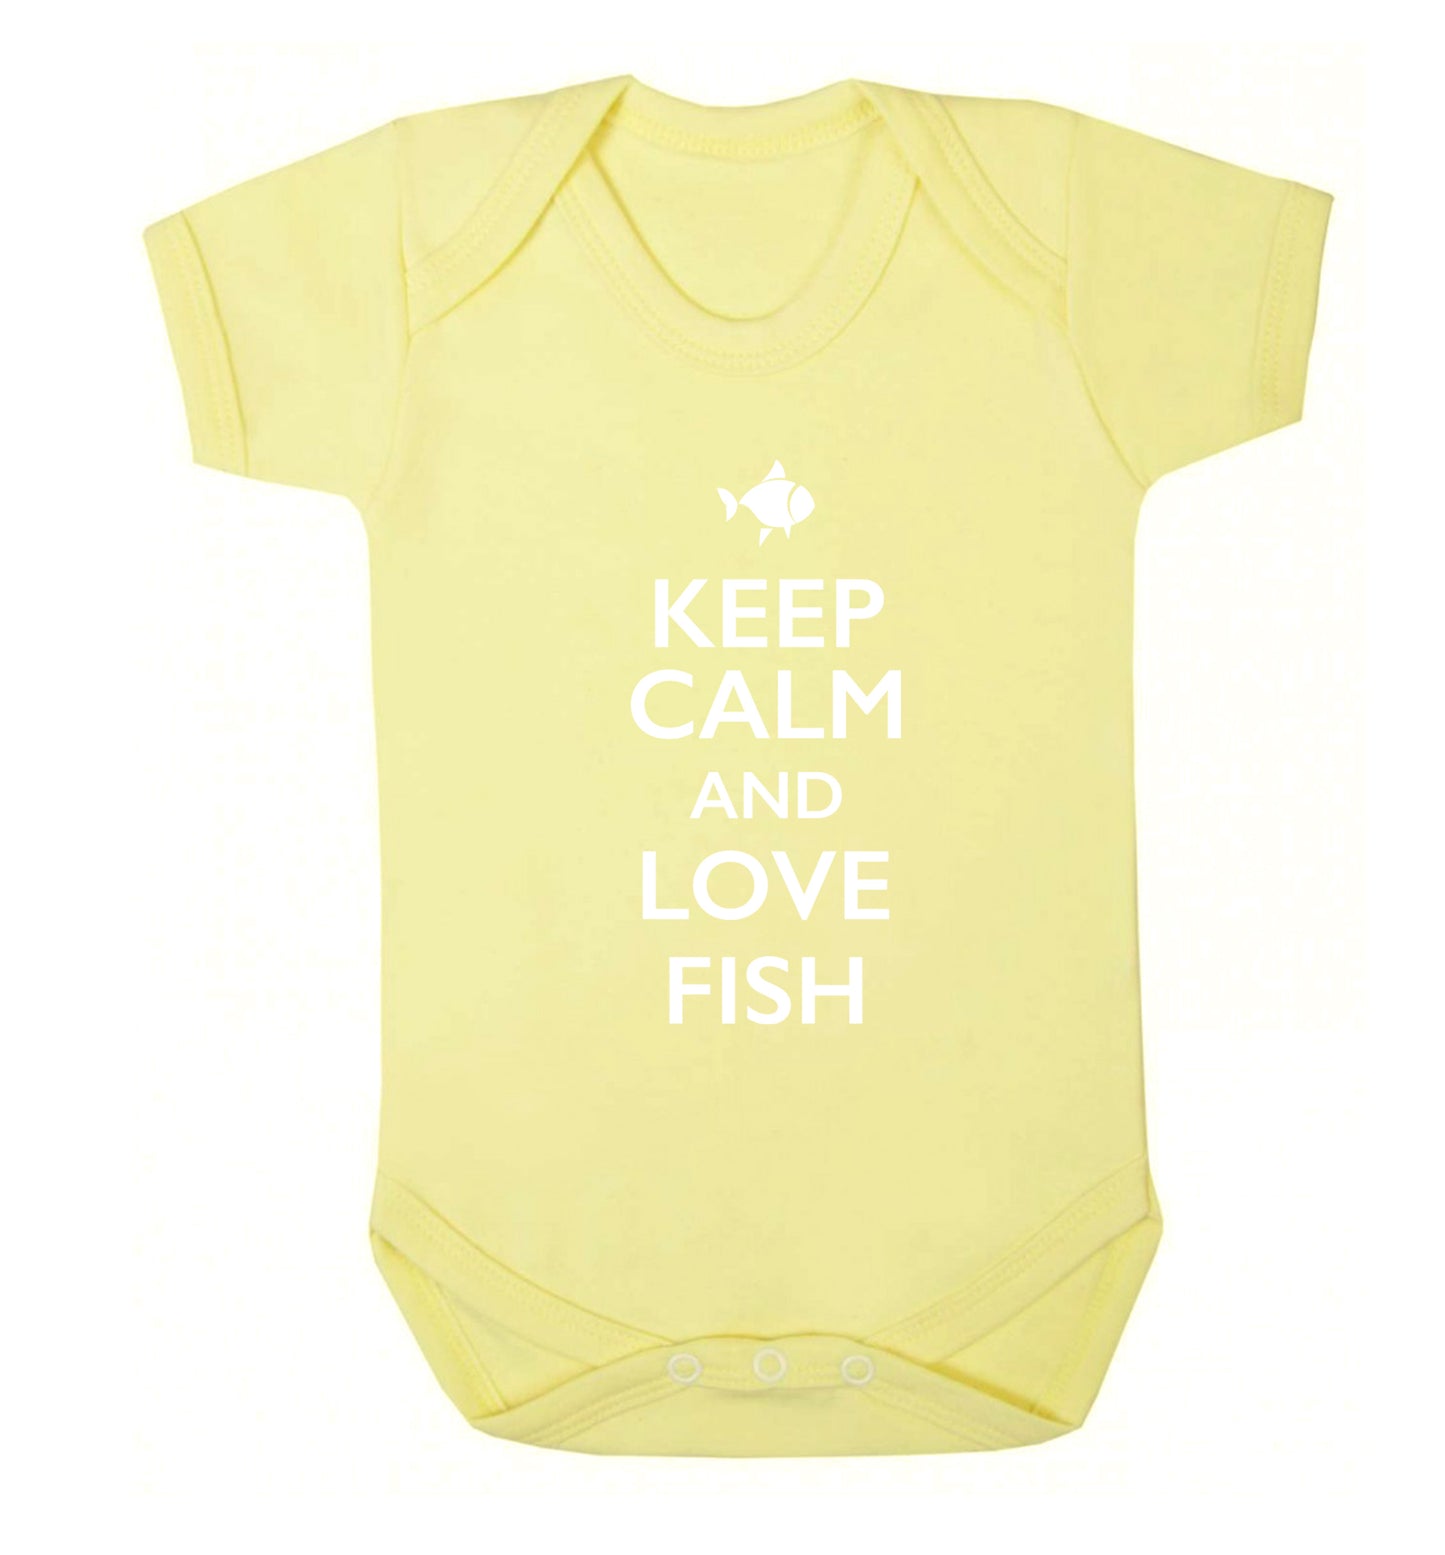 Keep calm and love fish Baby Vest pale yellow 18-24 months